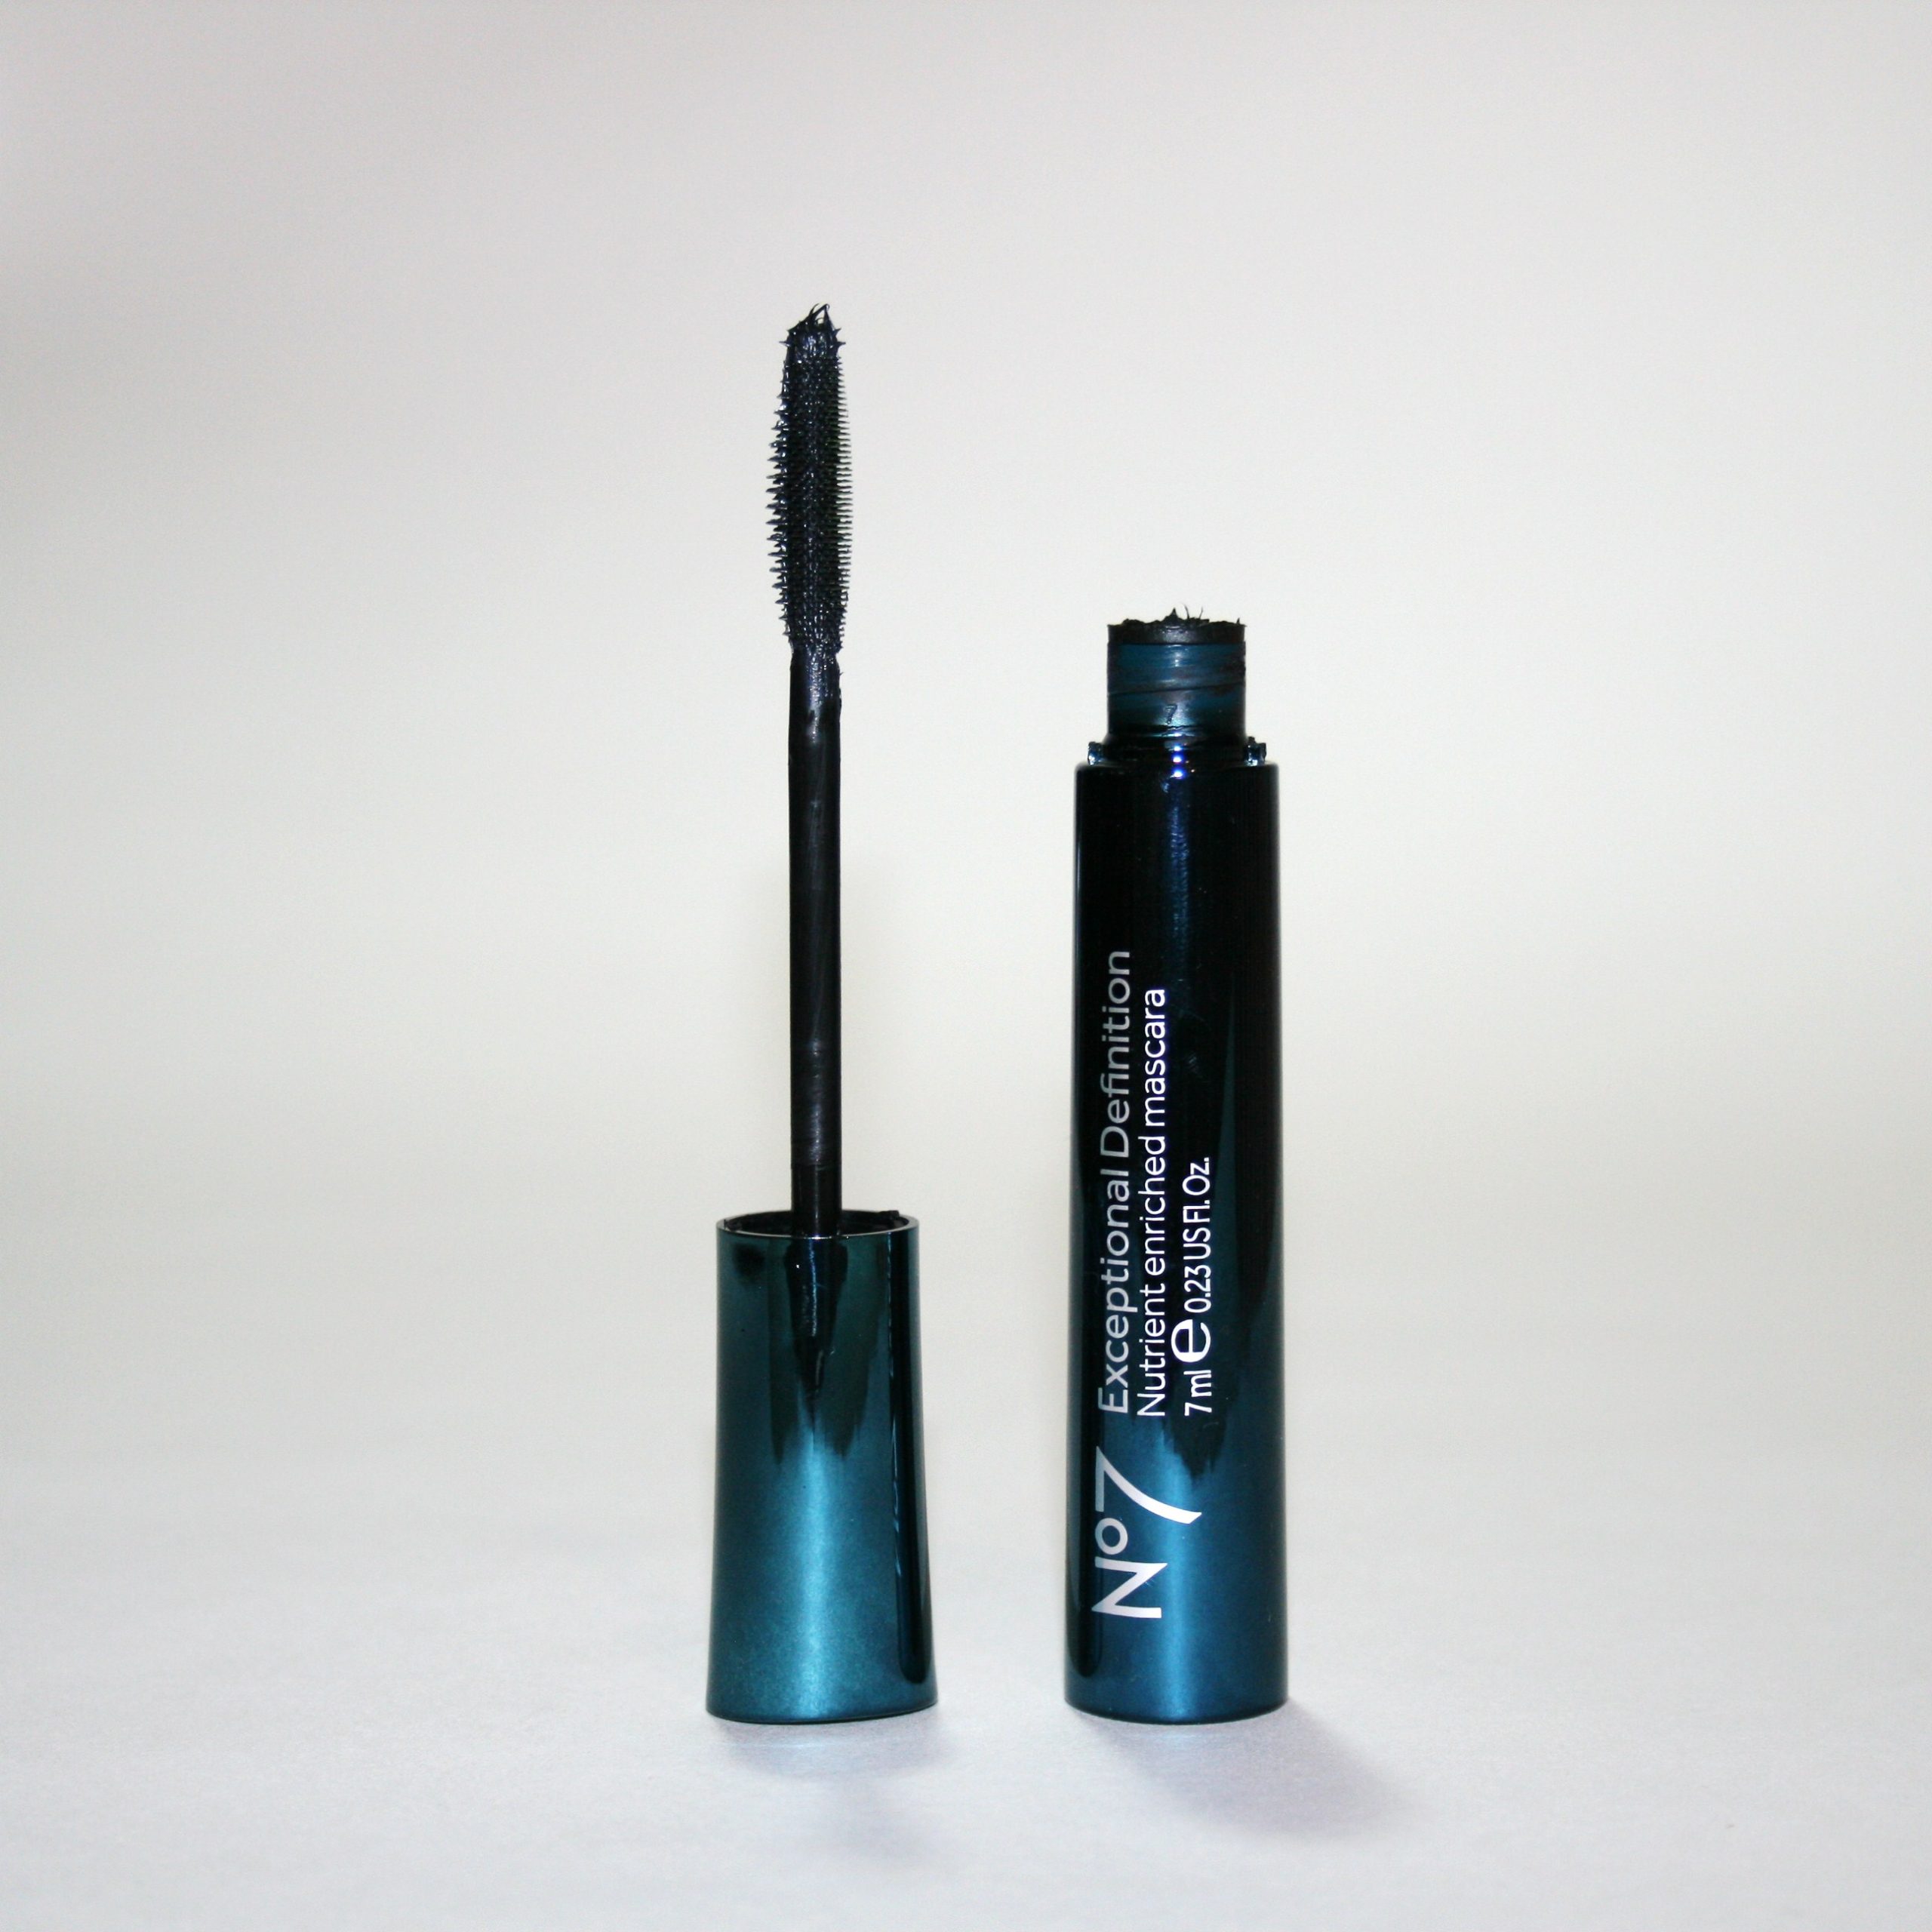 Boots No7 Exceptional Definition Mascara